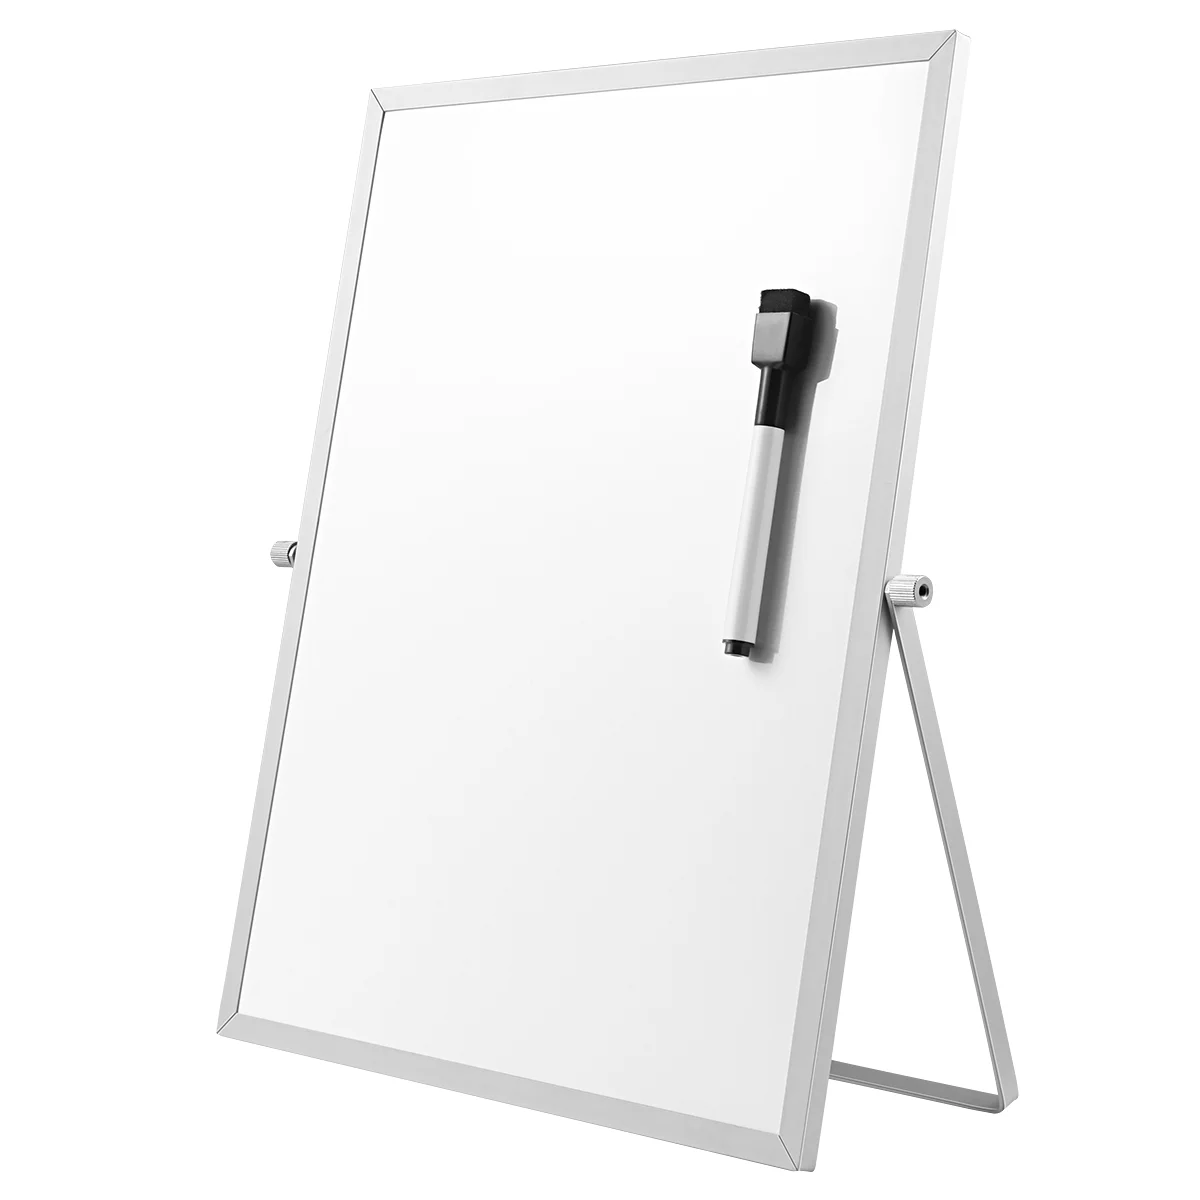 Magnetic White Board Dry Erase Board Double Sided Practical with Stand White Board for Office School Home Whiteboard Erasable double side magnetic whiteboard office school dry erase writing board pen magnets buttons